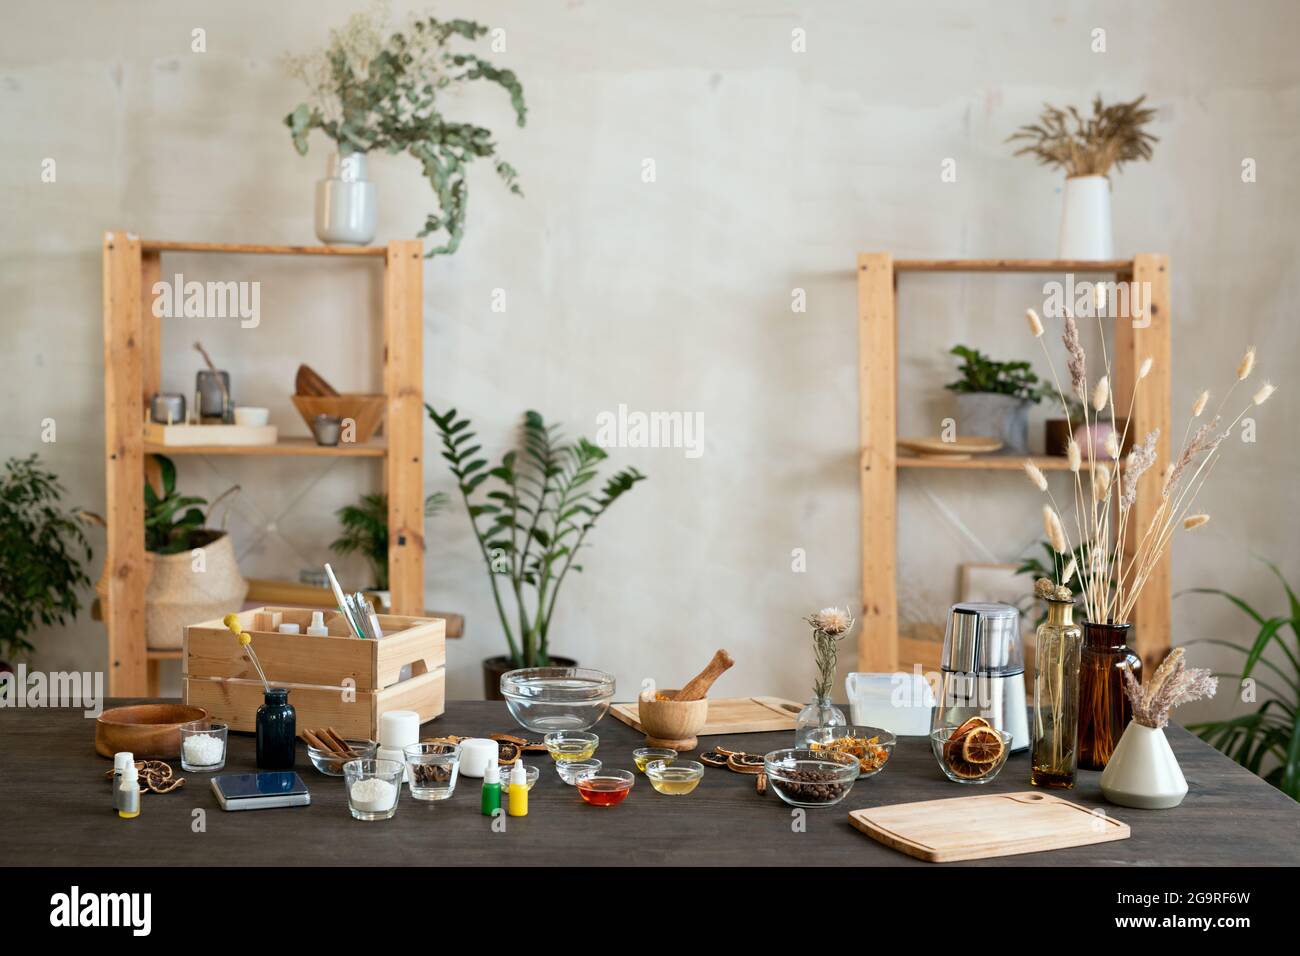 Interior of workplace with ingredients for making natural cosmetic products Stock Photo